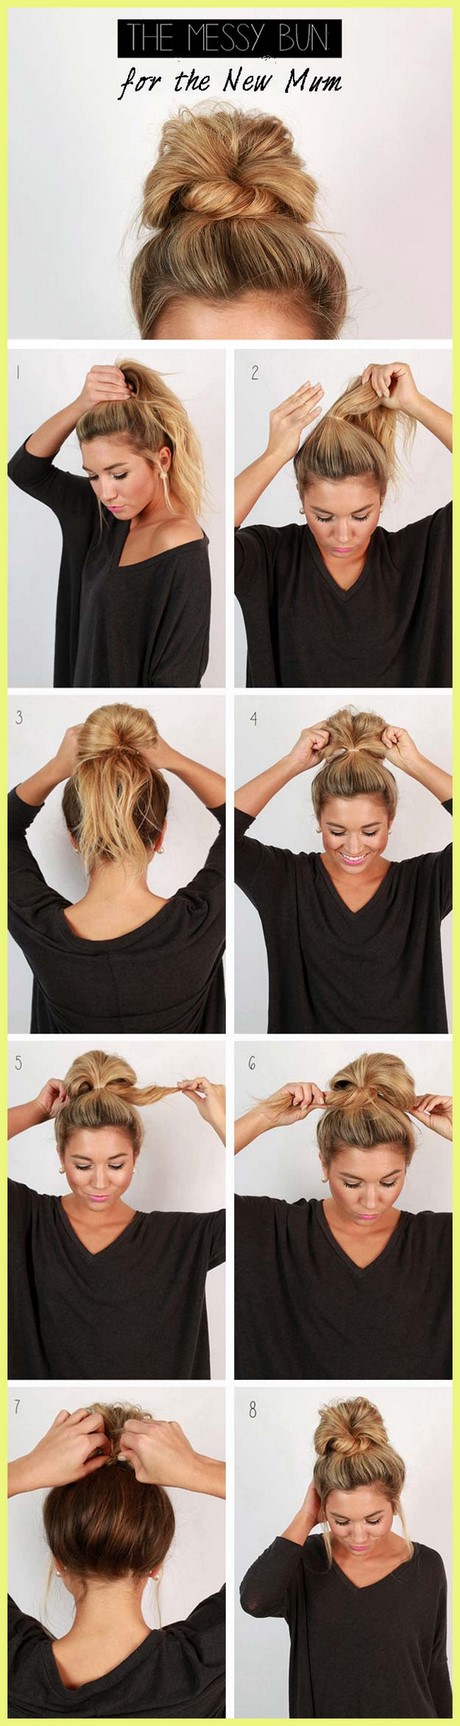 Quick and easy updos for medium length hair quick-and-easy-updos-for-medium-length-hair-19_4